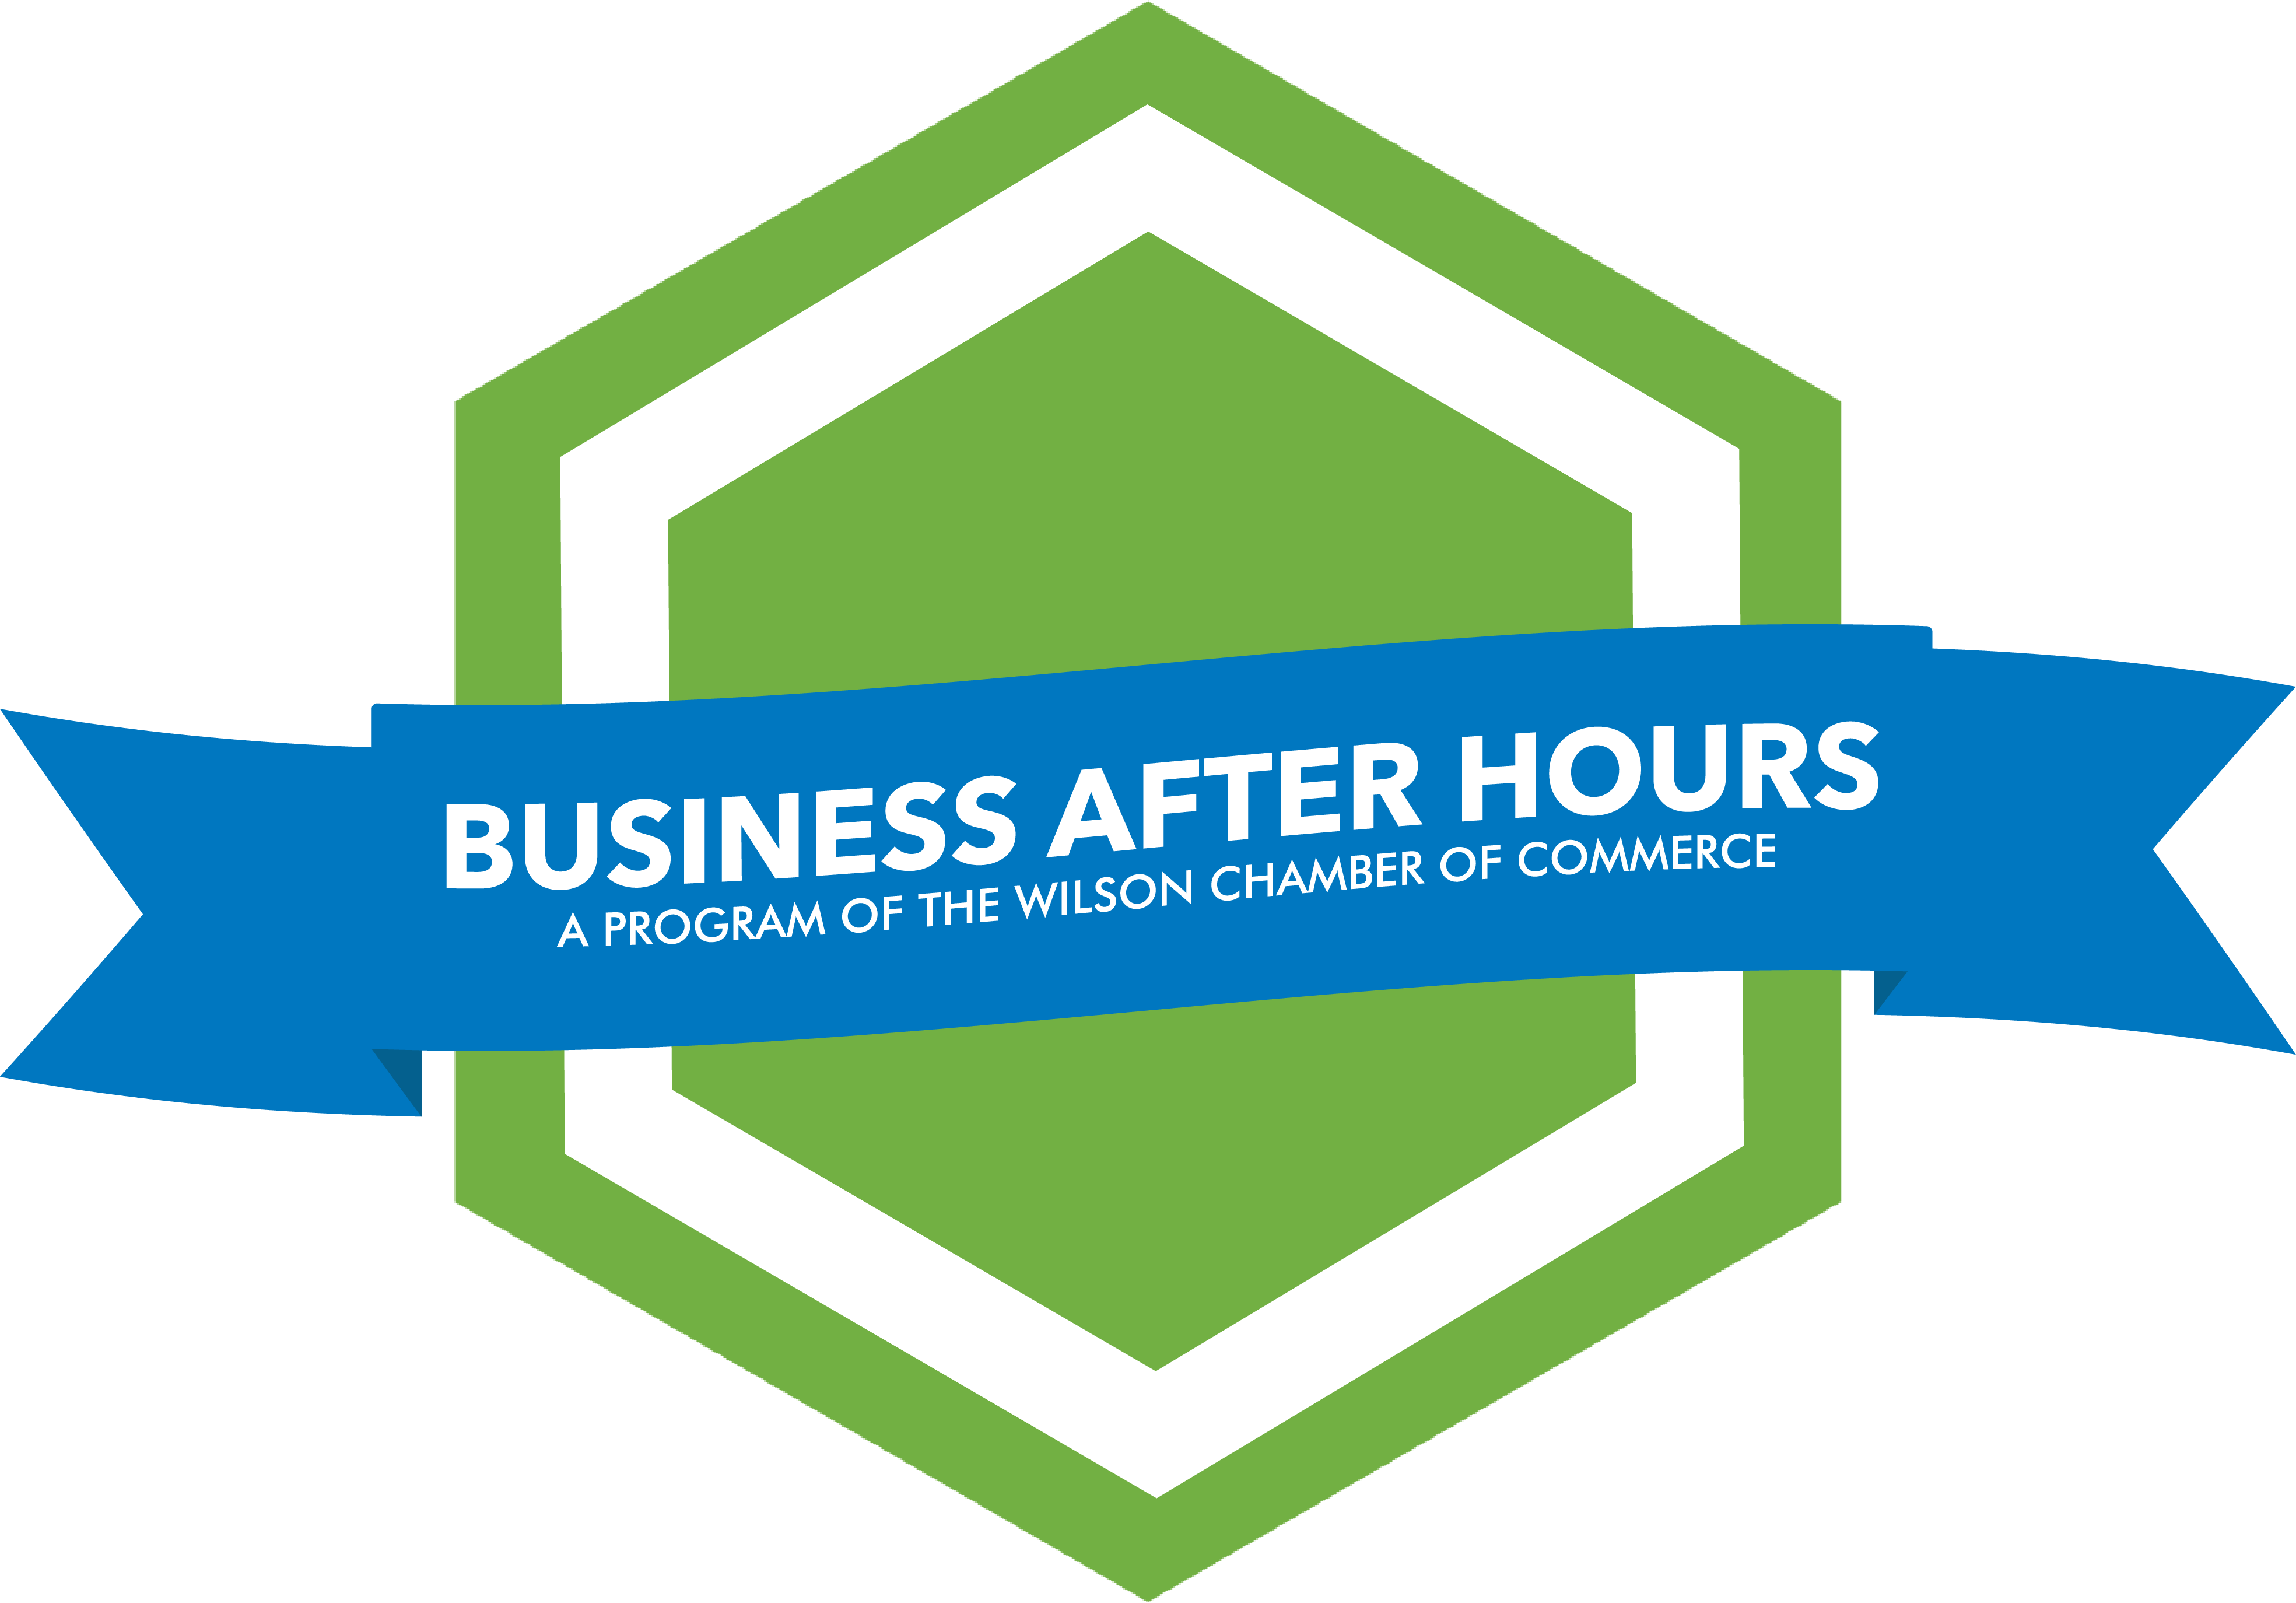 Image for Promote your business with an open house or business after hours